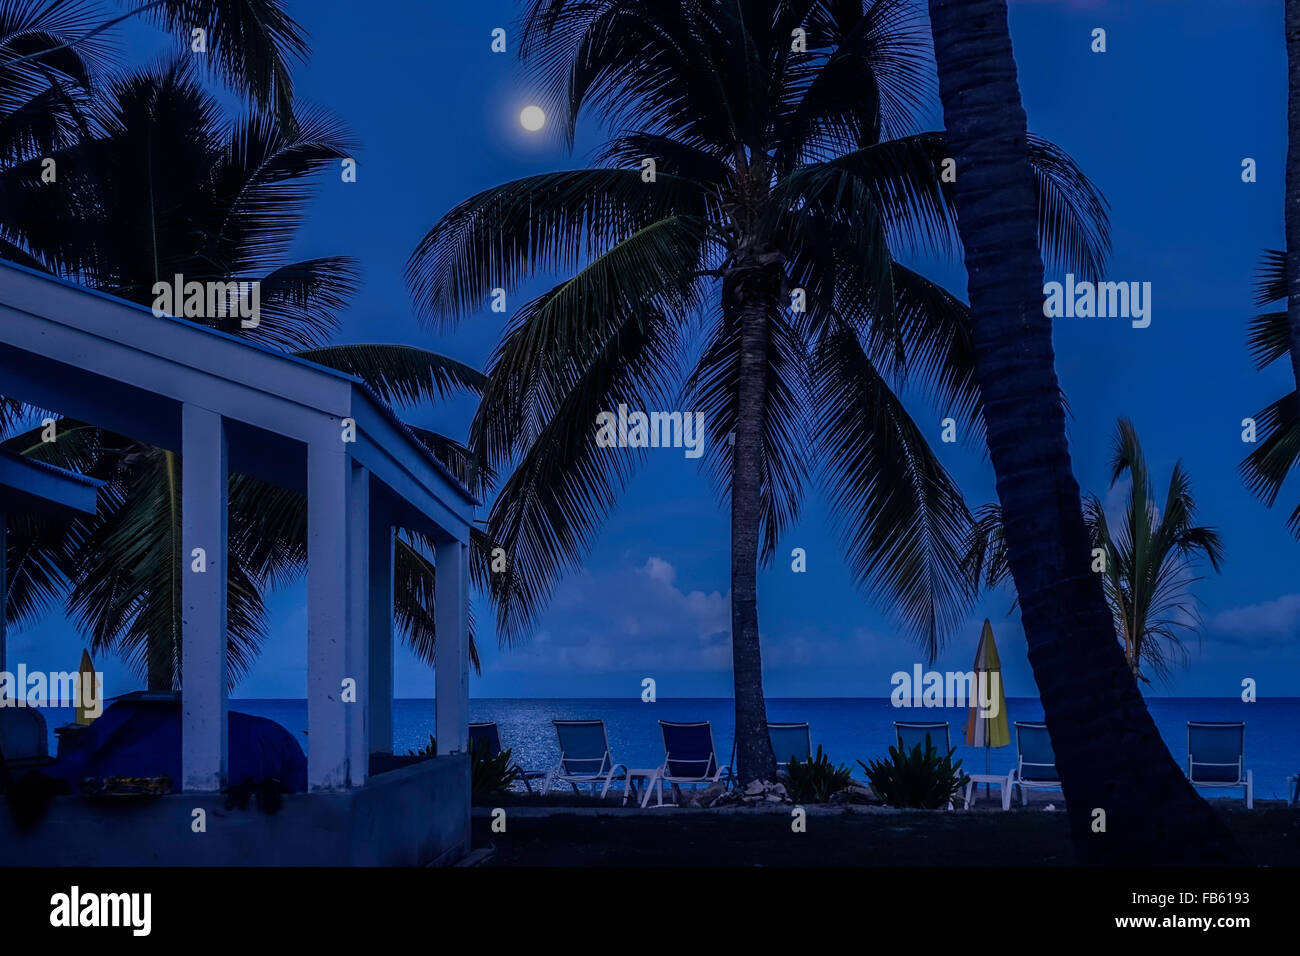 a full moon struggles through the clouds over the Caribbean sea. A palm tree beach scene. St. Croix, U.S. Virgin Islands. Cottages by the Sea resort. Stock Photo